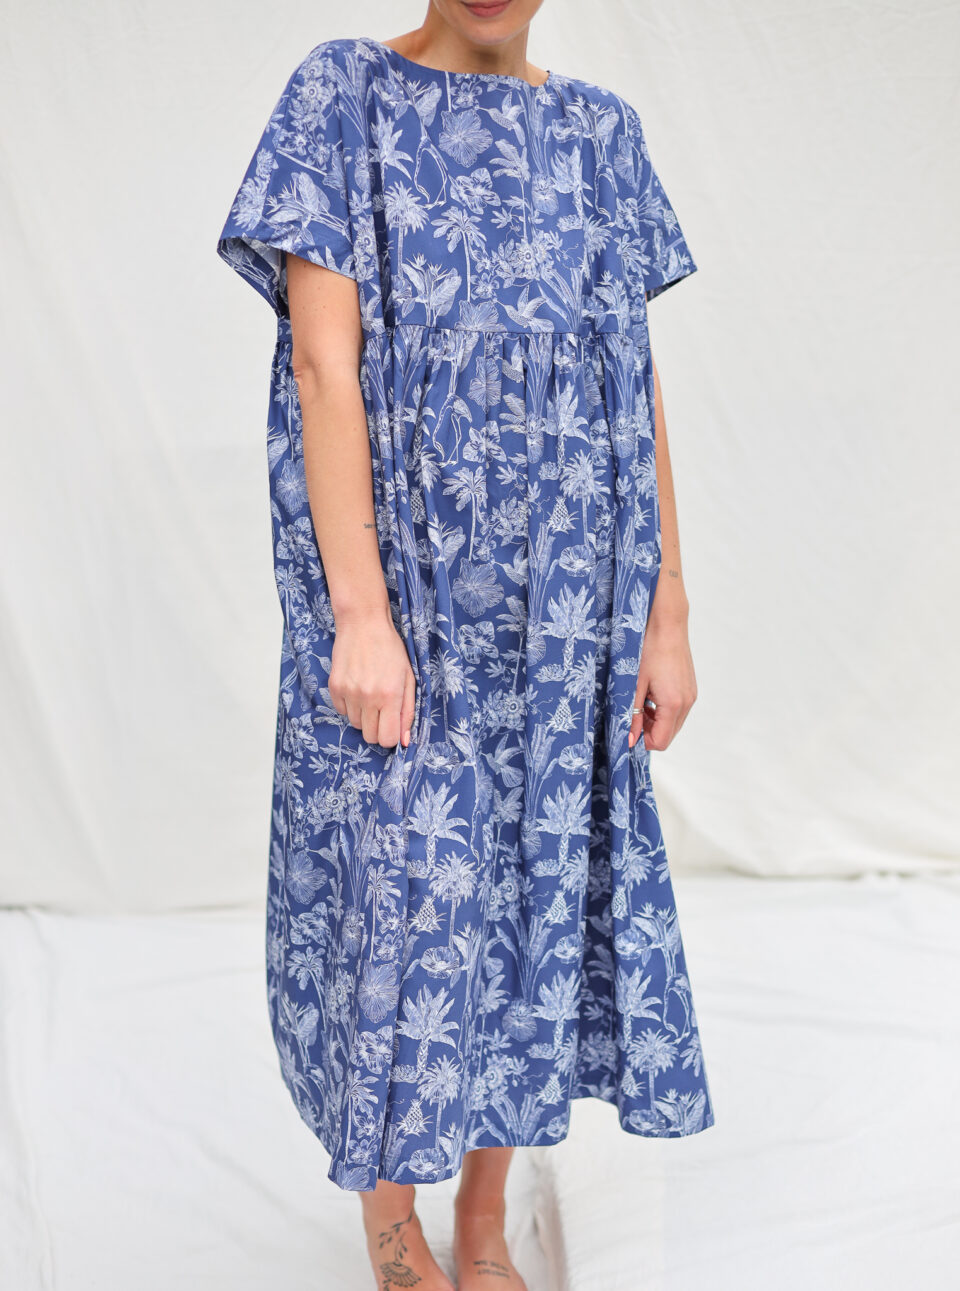 Oversized piccadilly poplin dress SILVINA in Darwin's Voyage Blue print | Dress | Sustainable clothing | OffOn clothing